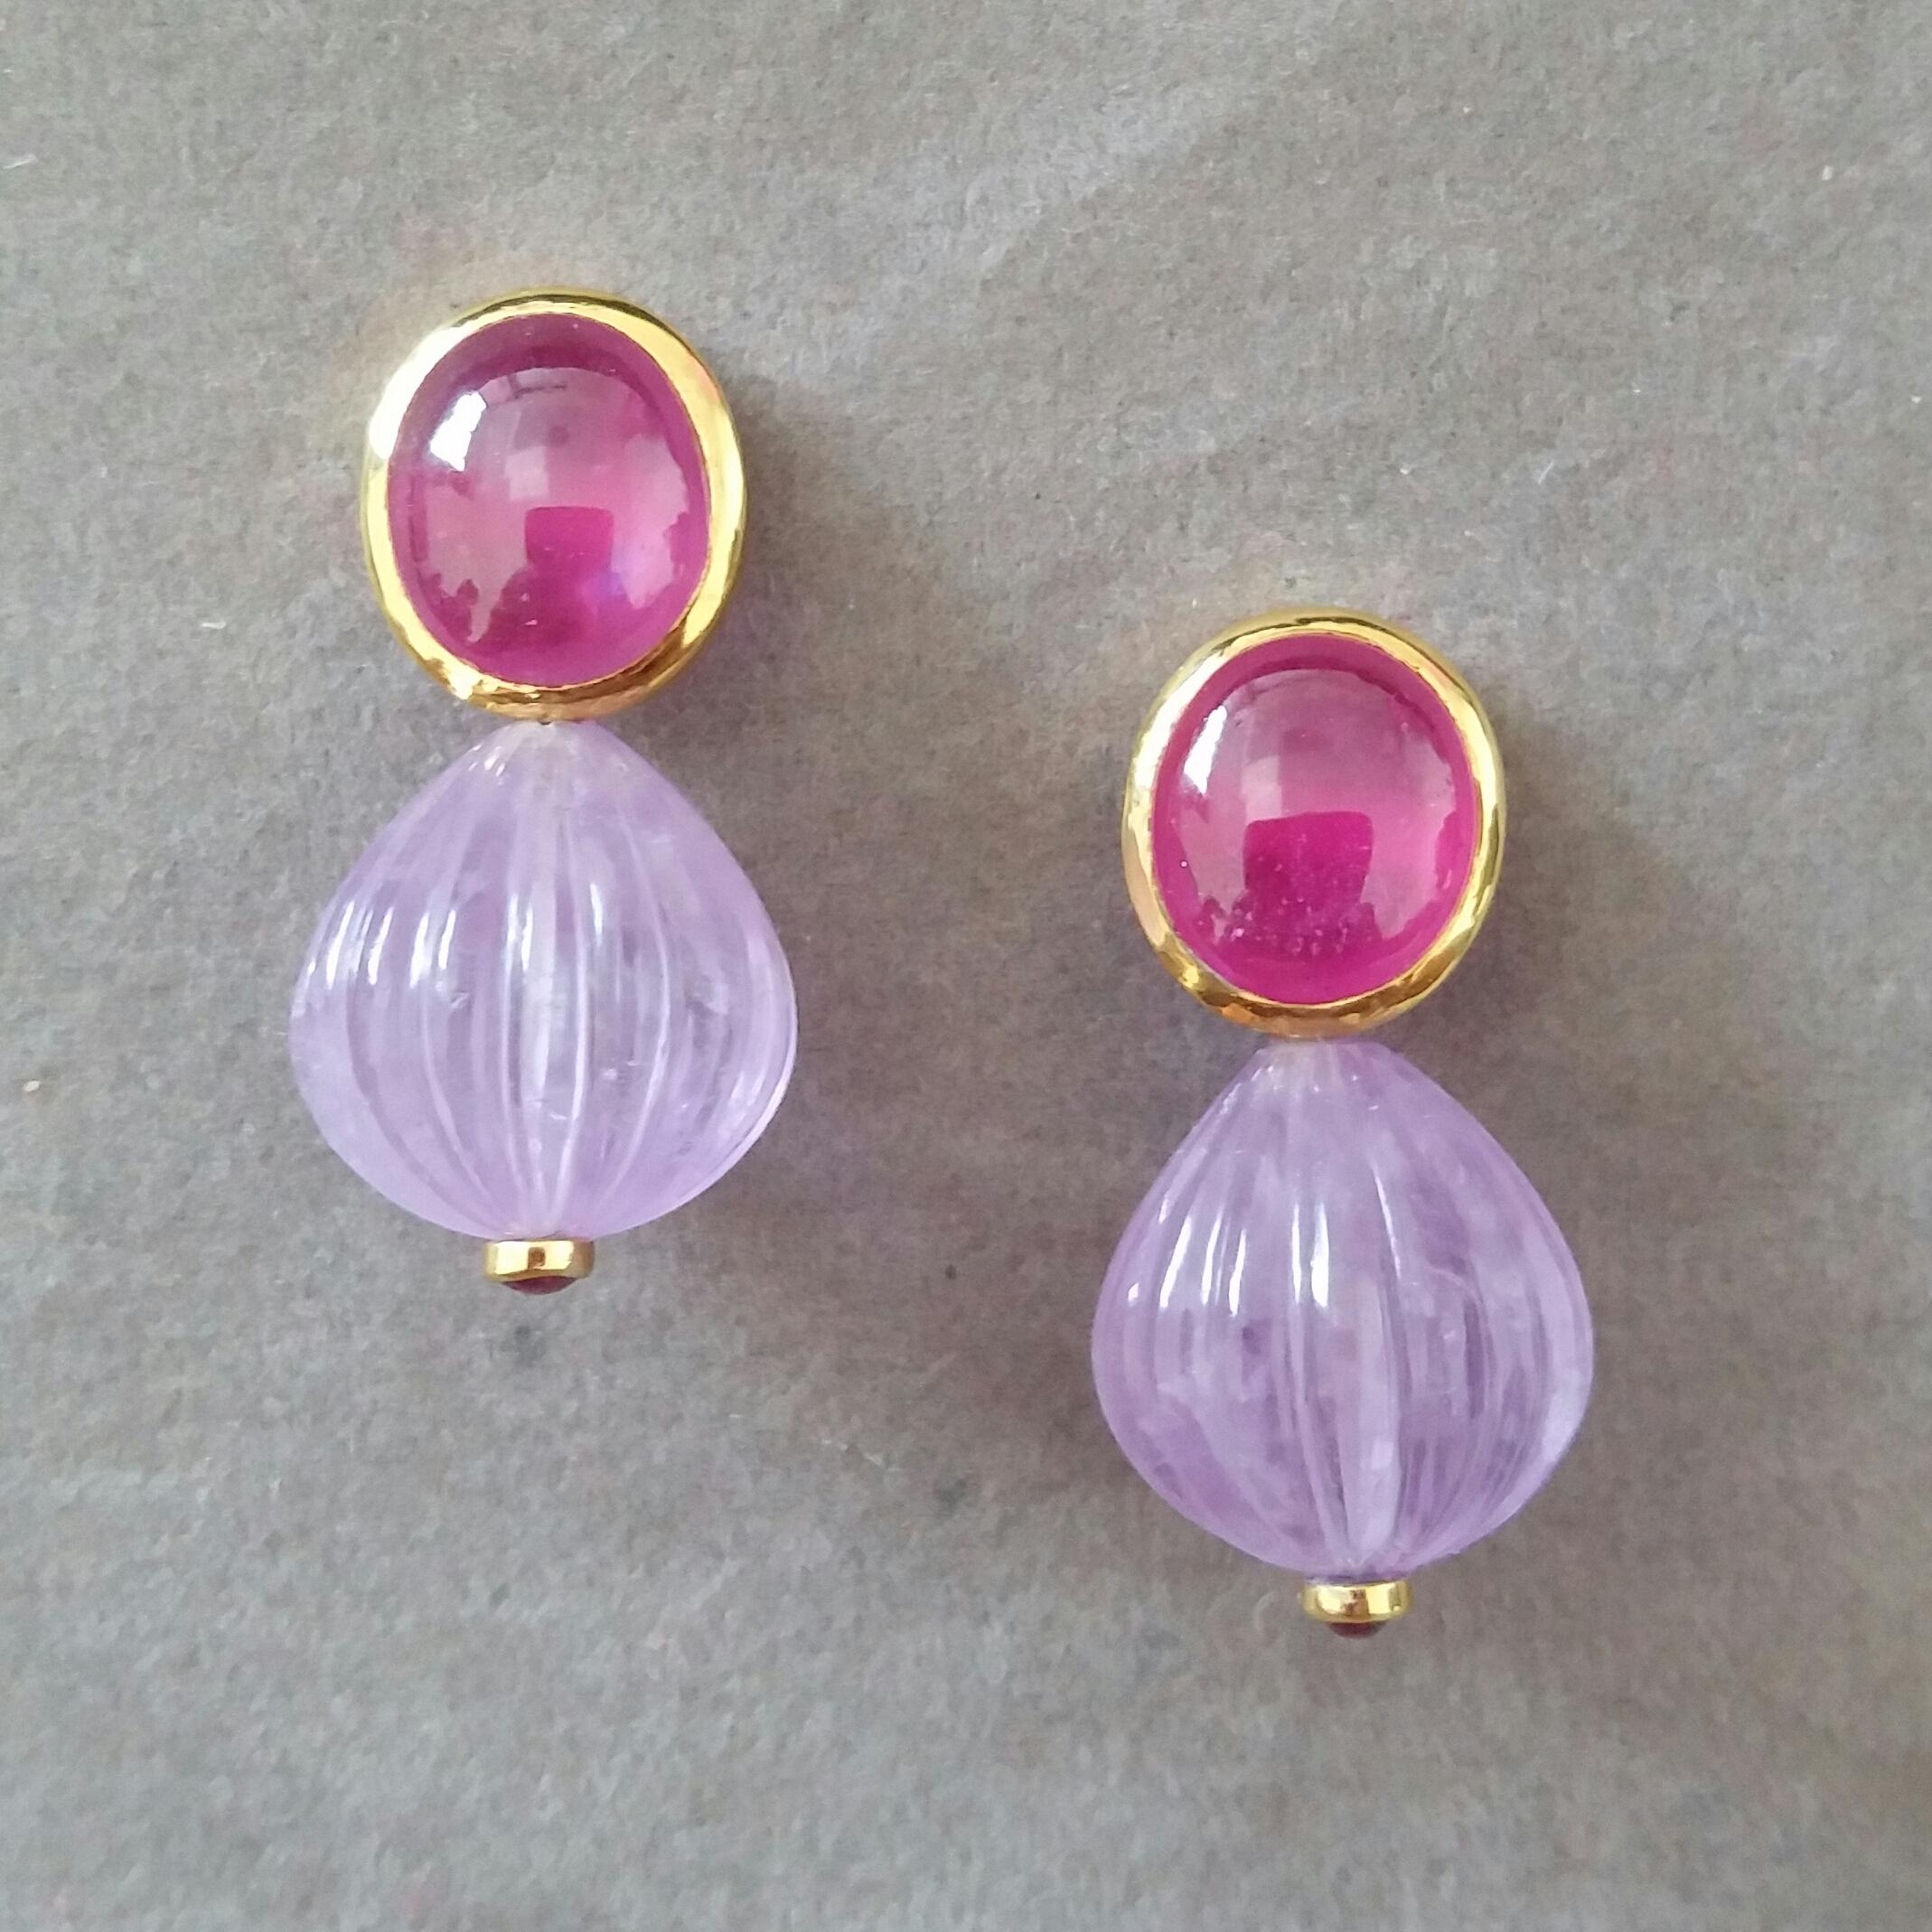 Mixed Cut Oval Ruby Cabochons Yellow Gold Bezel Carved Amethyst Round Drops Stud Earrings For Sale